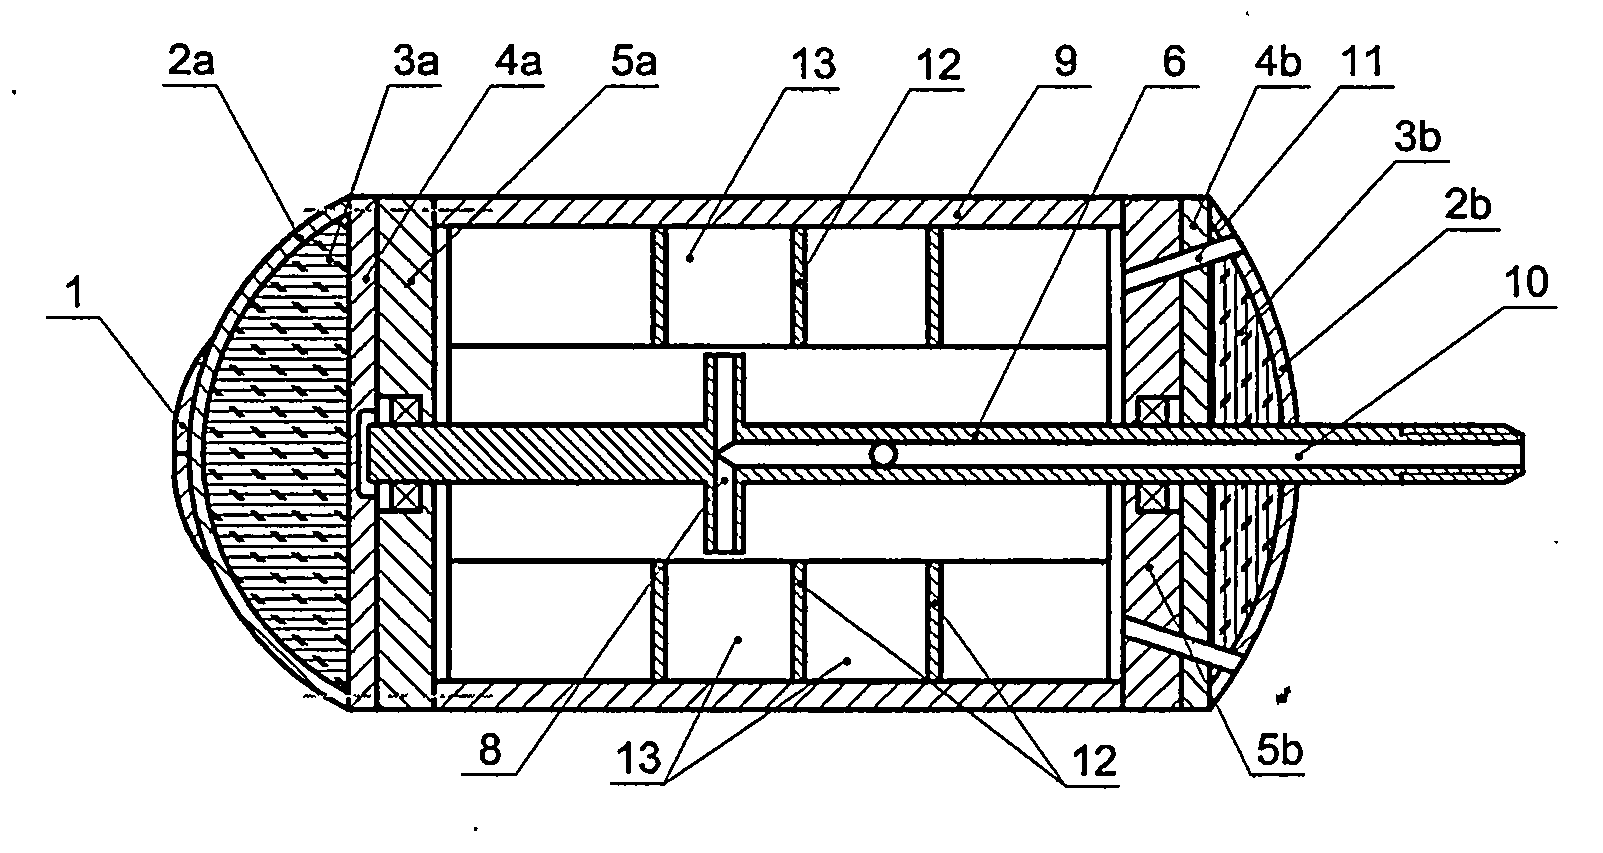 Air-powered rotary-cut type pipeline dredging apparatus